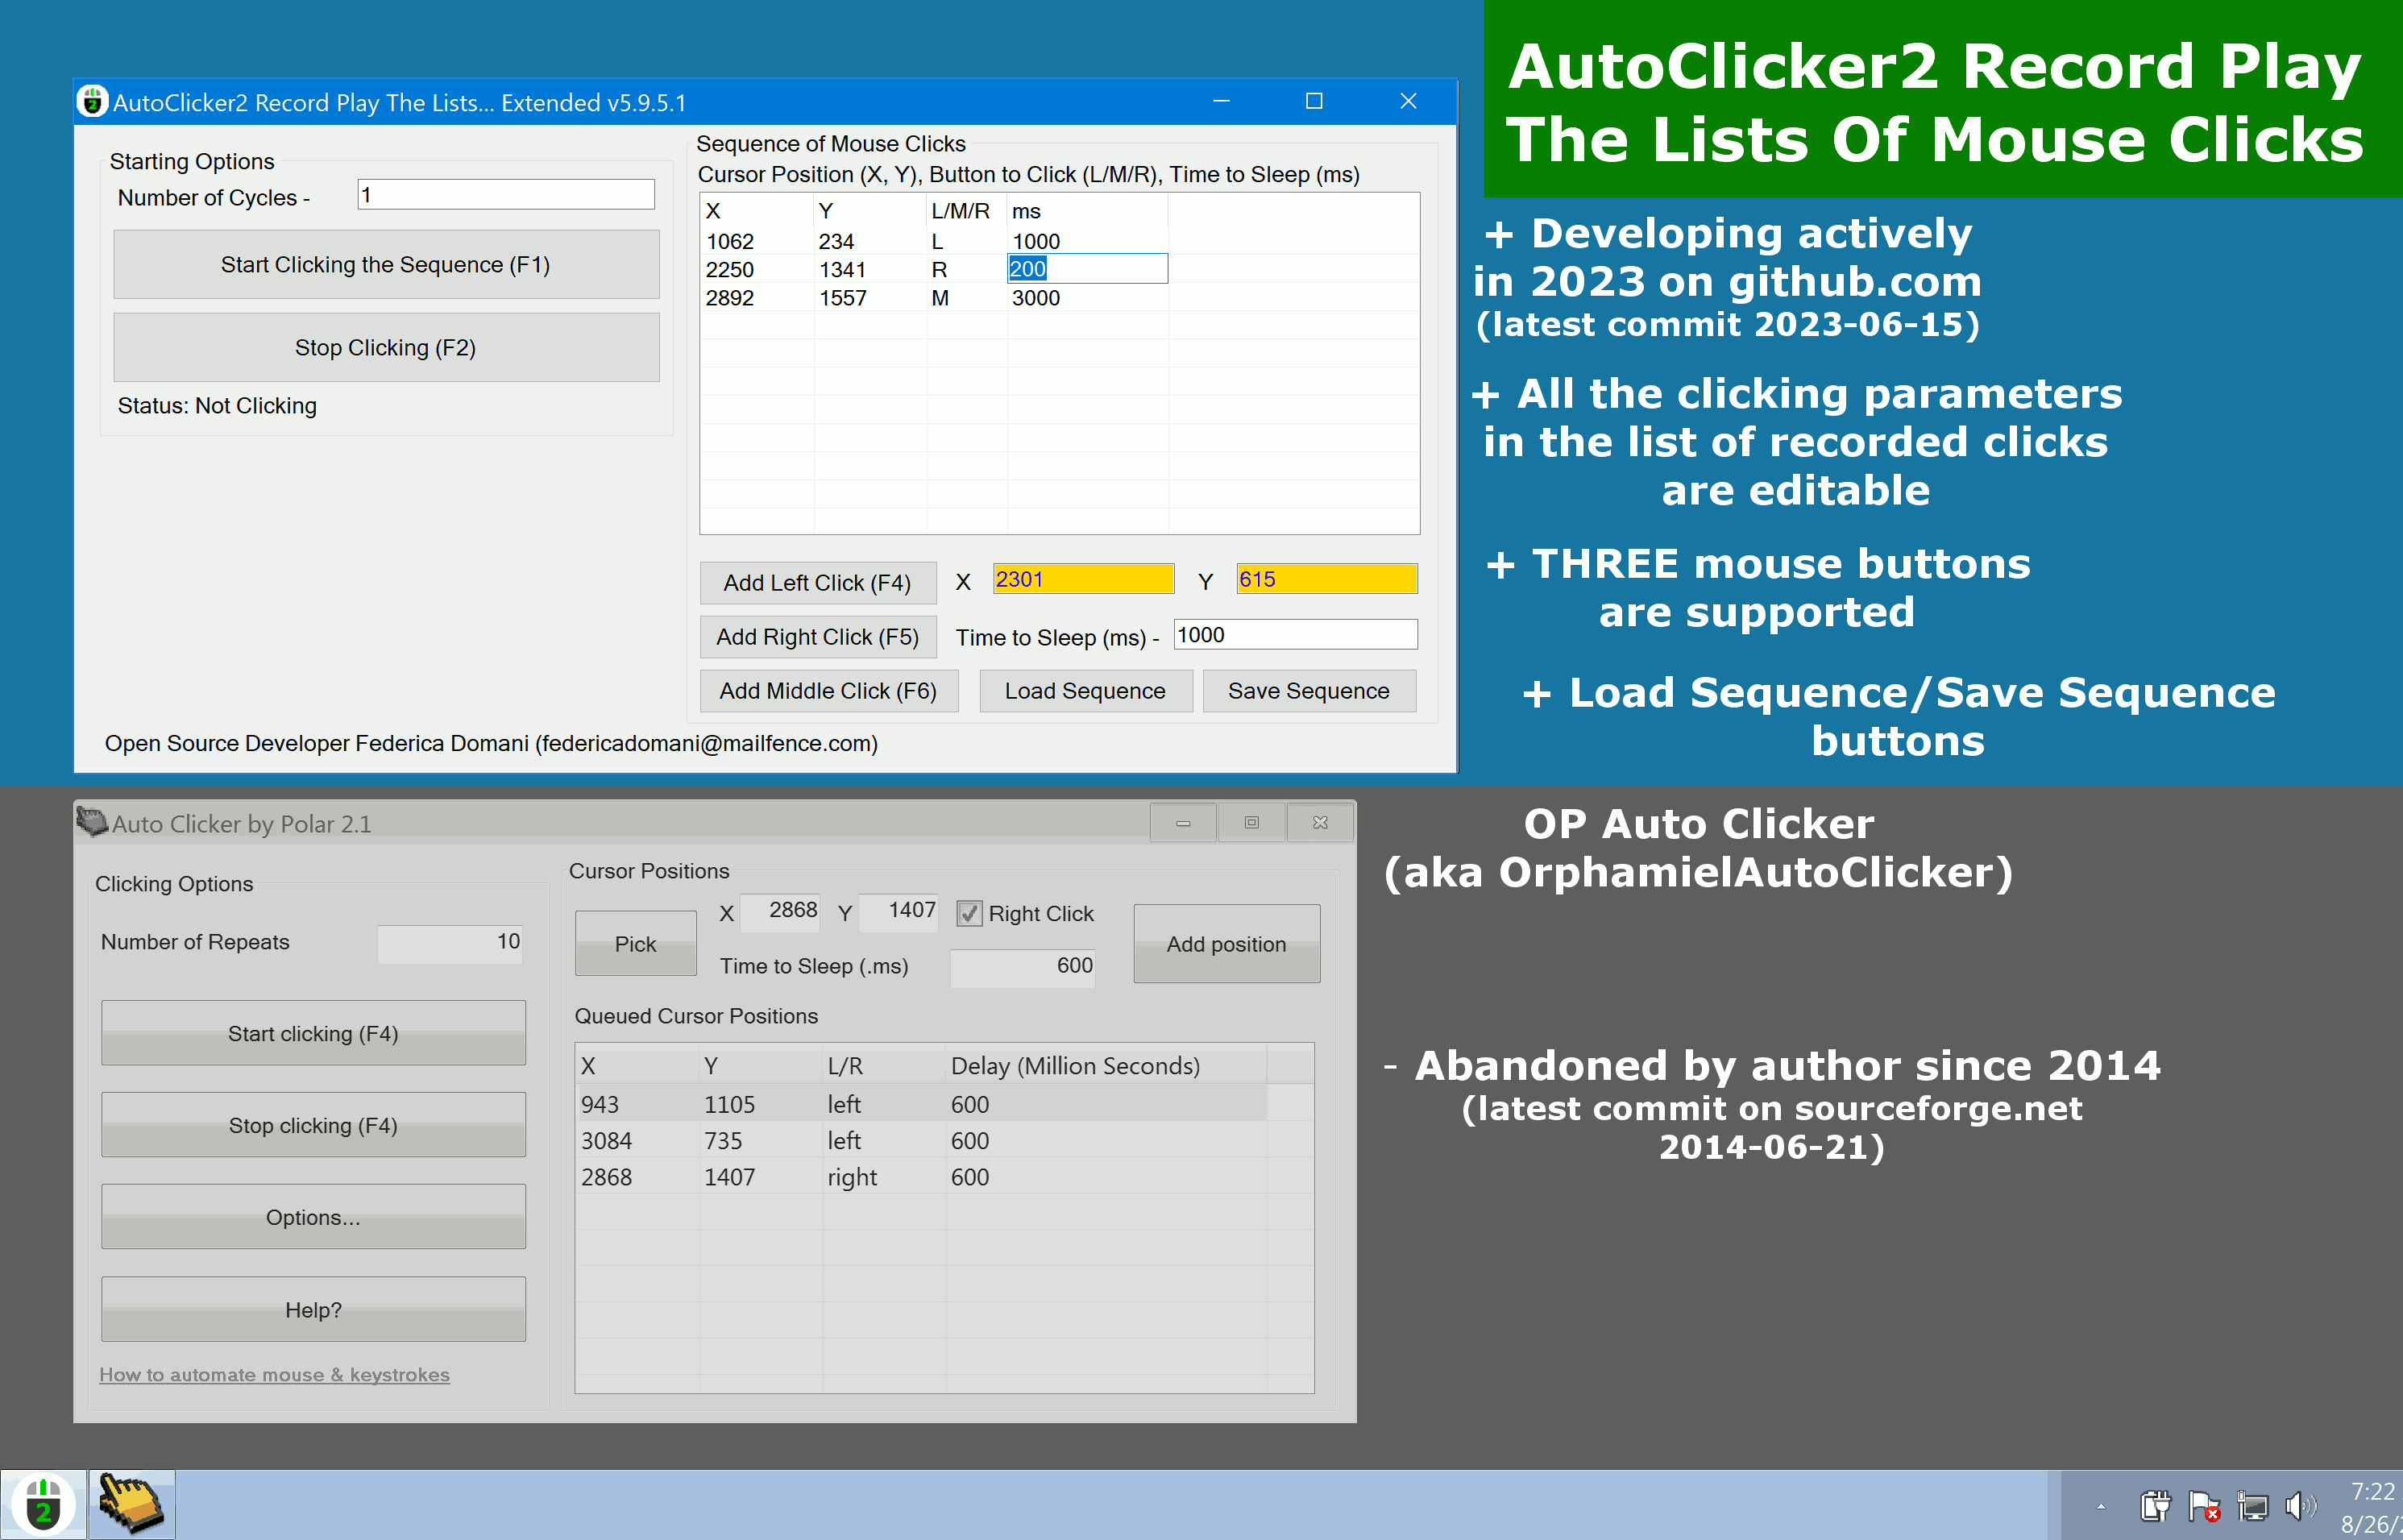 AutoClicker2 Record Play The Lists Of Mouse Clicks version 5.9.6.0: "AutoClicker2Ex" application